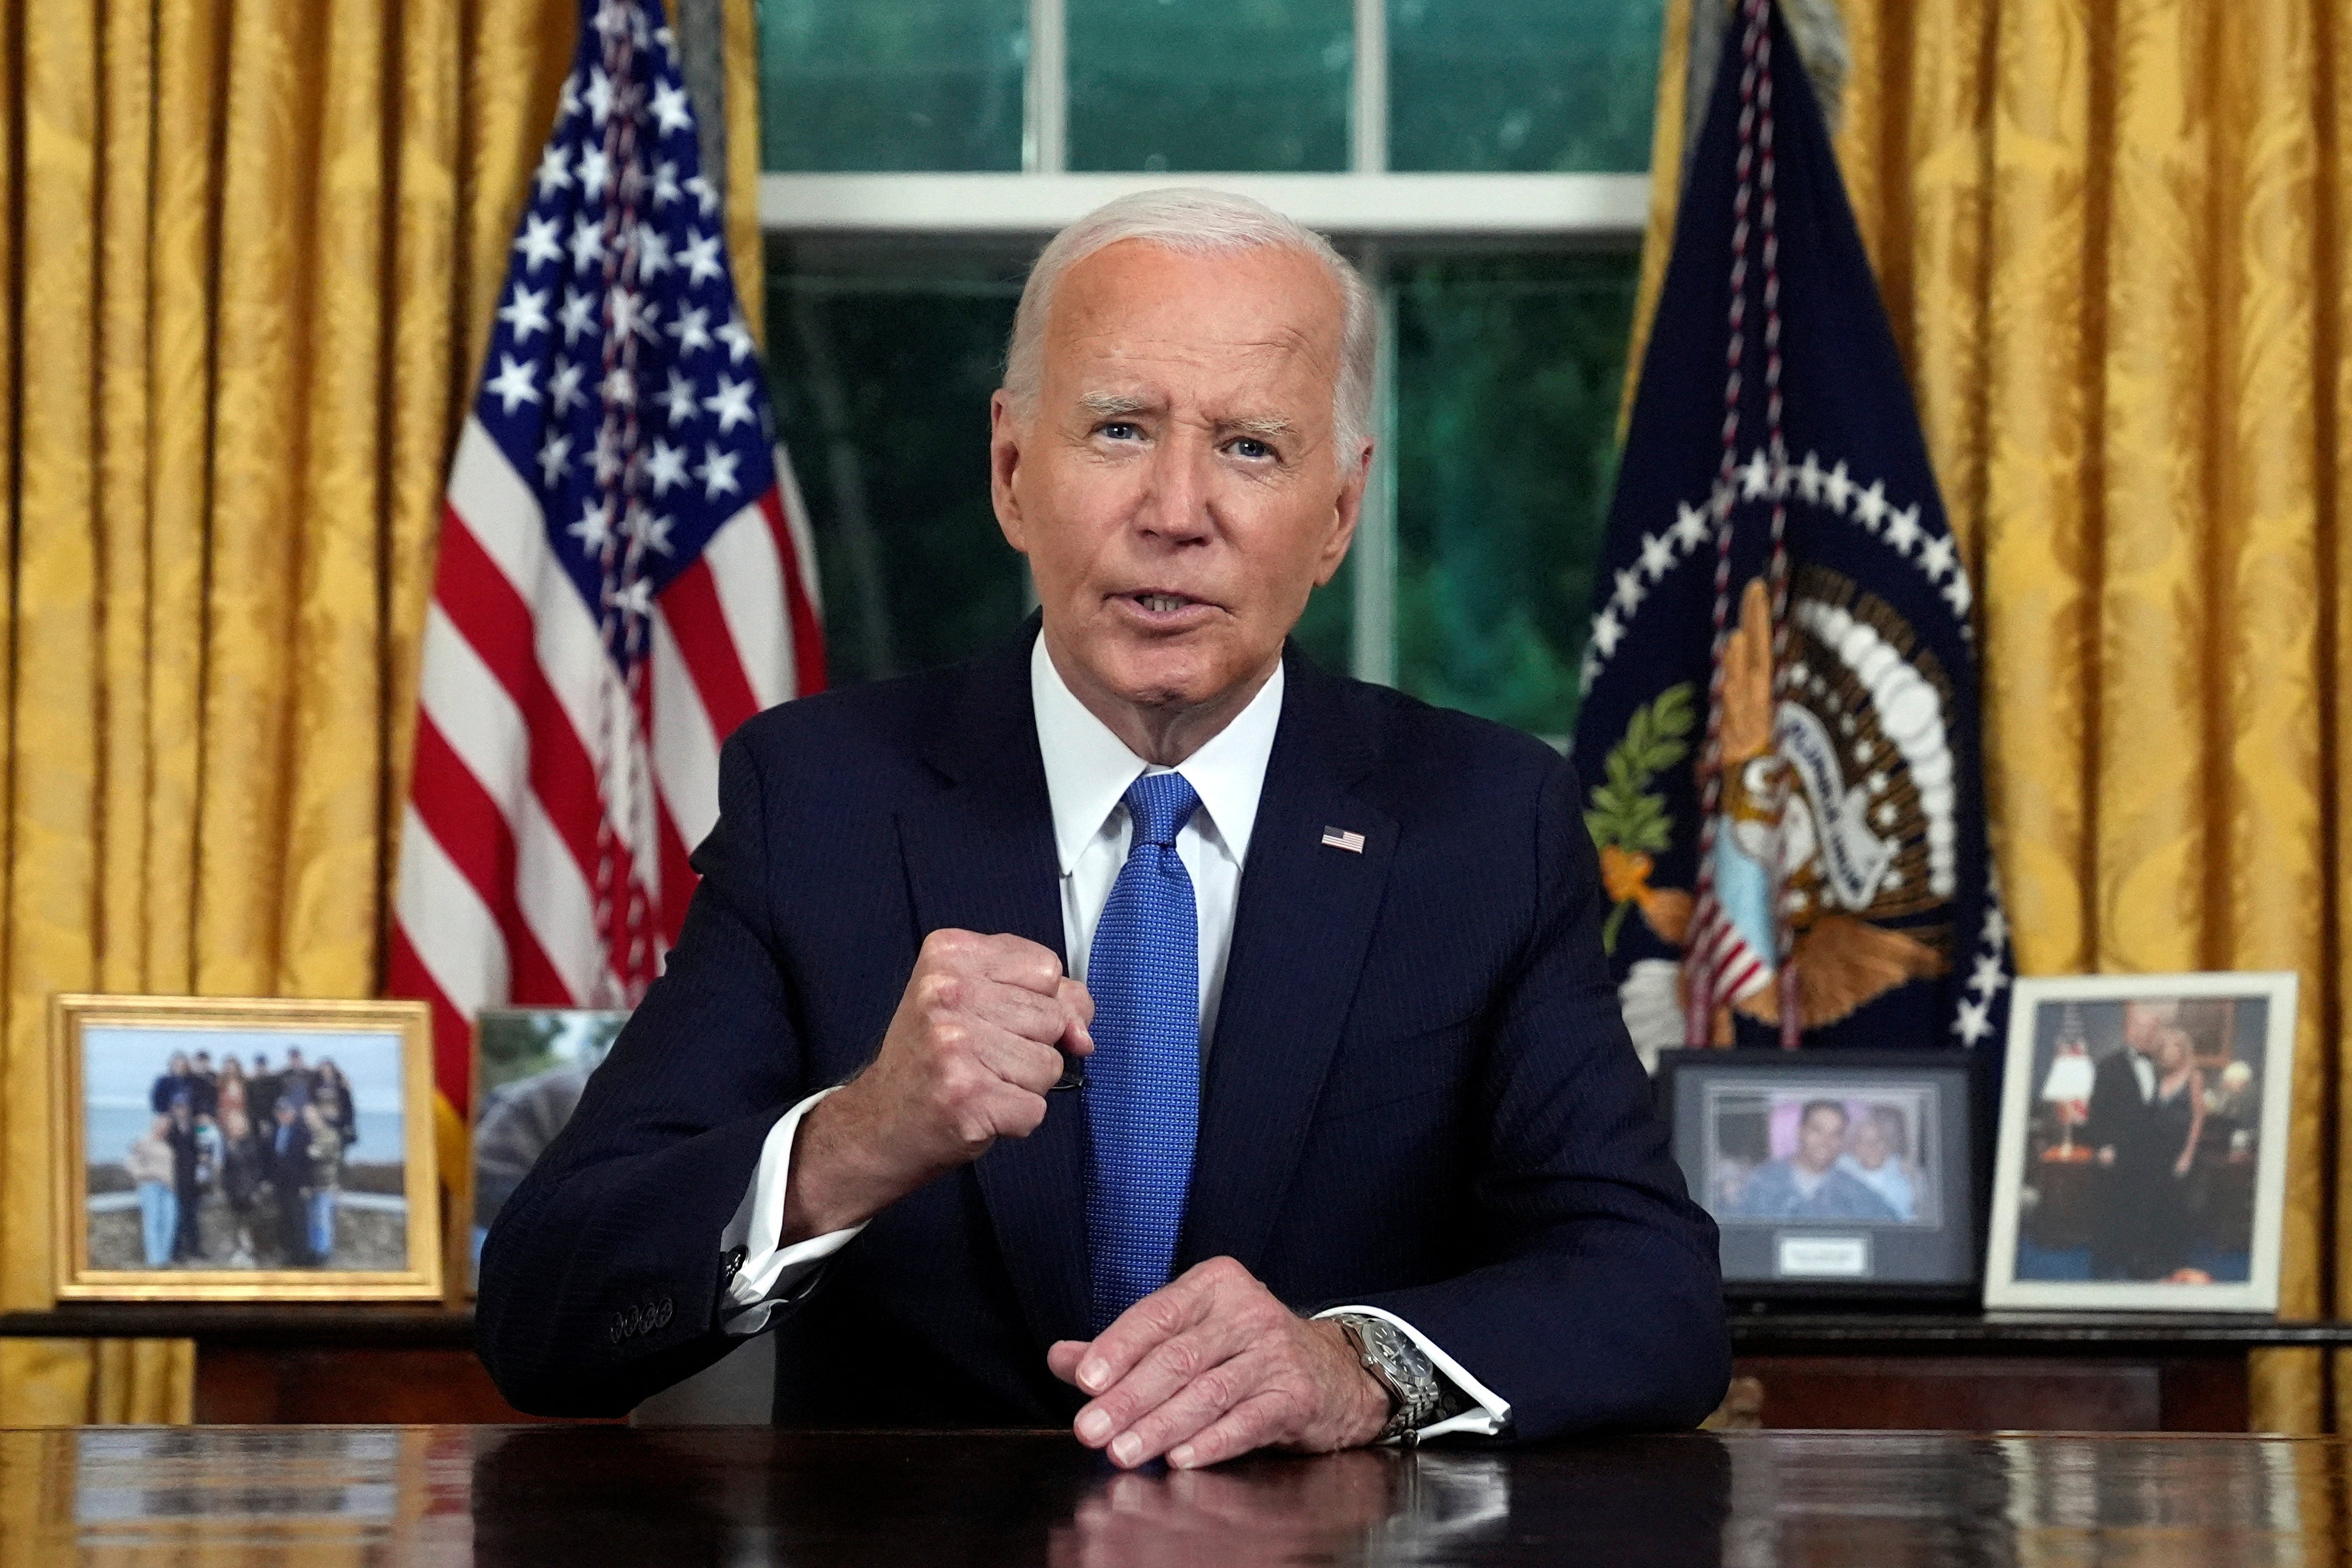 Biden Offered a Hint About Why He Really Dropped Out. It Wasn’t His Age.